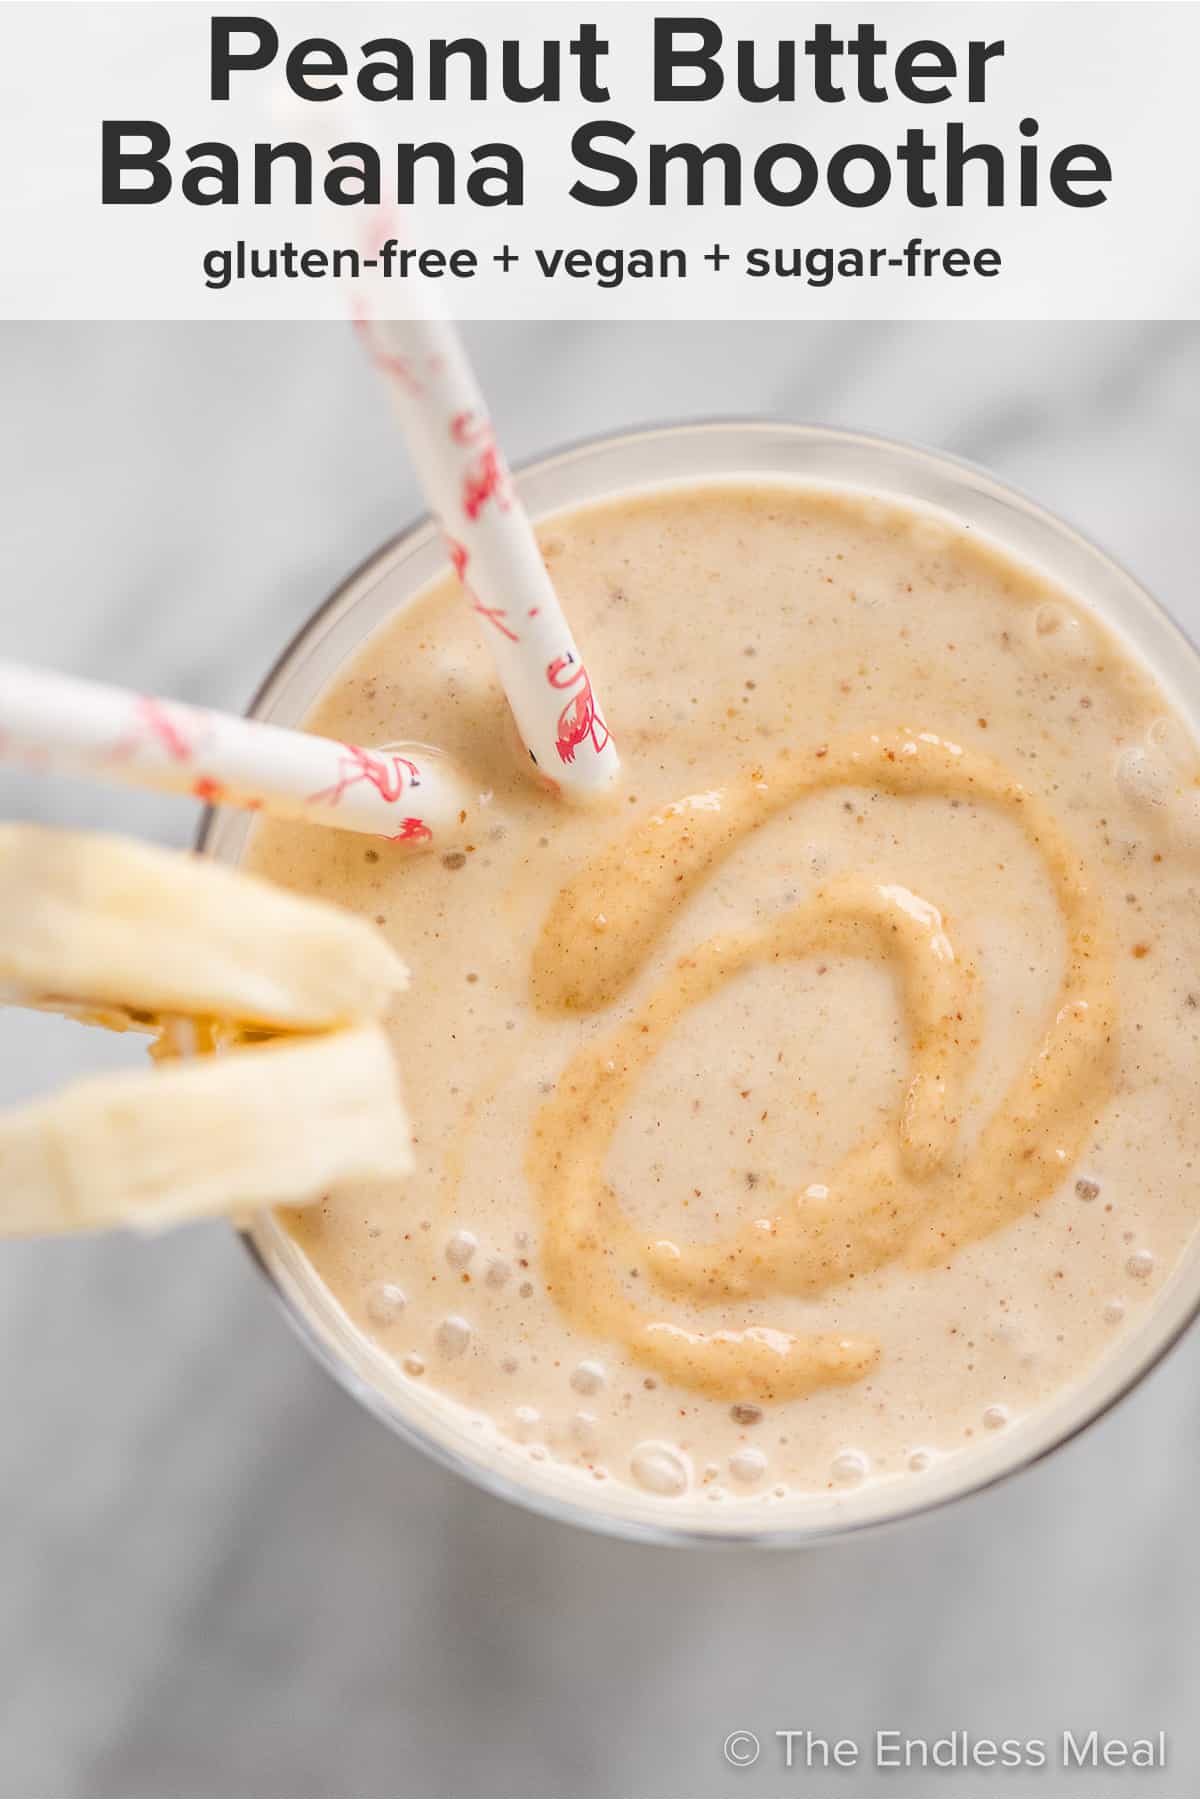 Looking down on a cup of Peanut Butter Banana Smoothie with banana slices on the side and the recipe title on top of the picture.